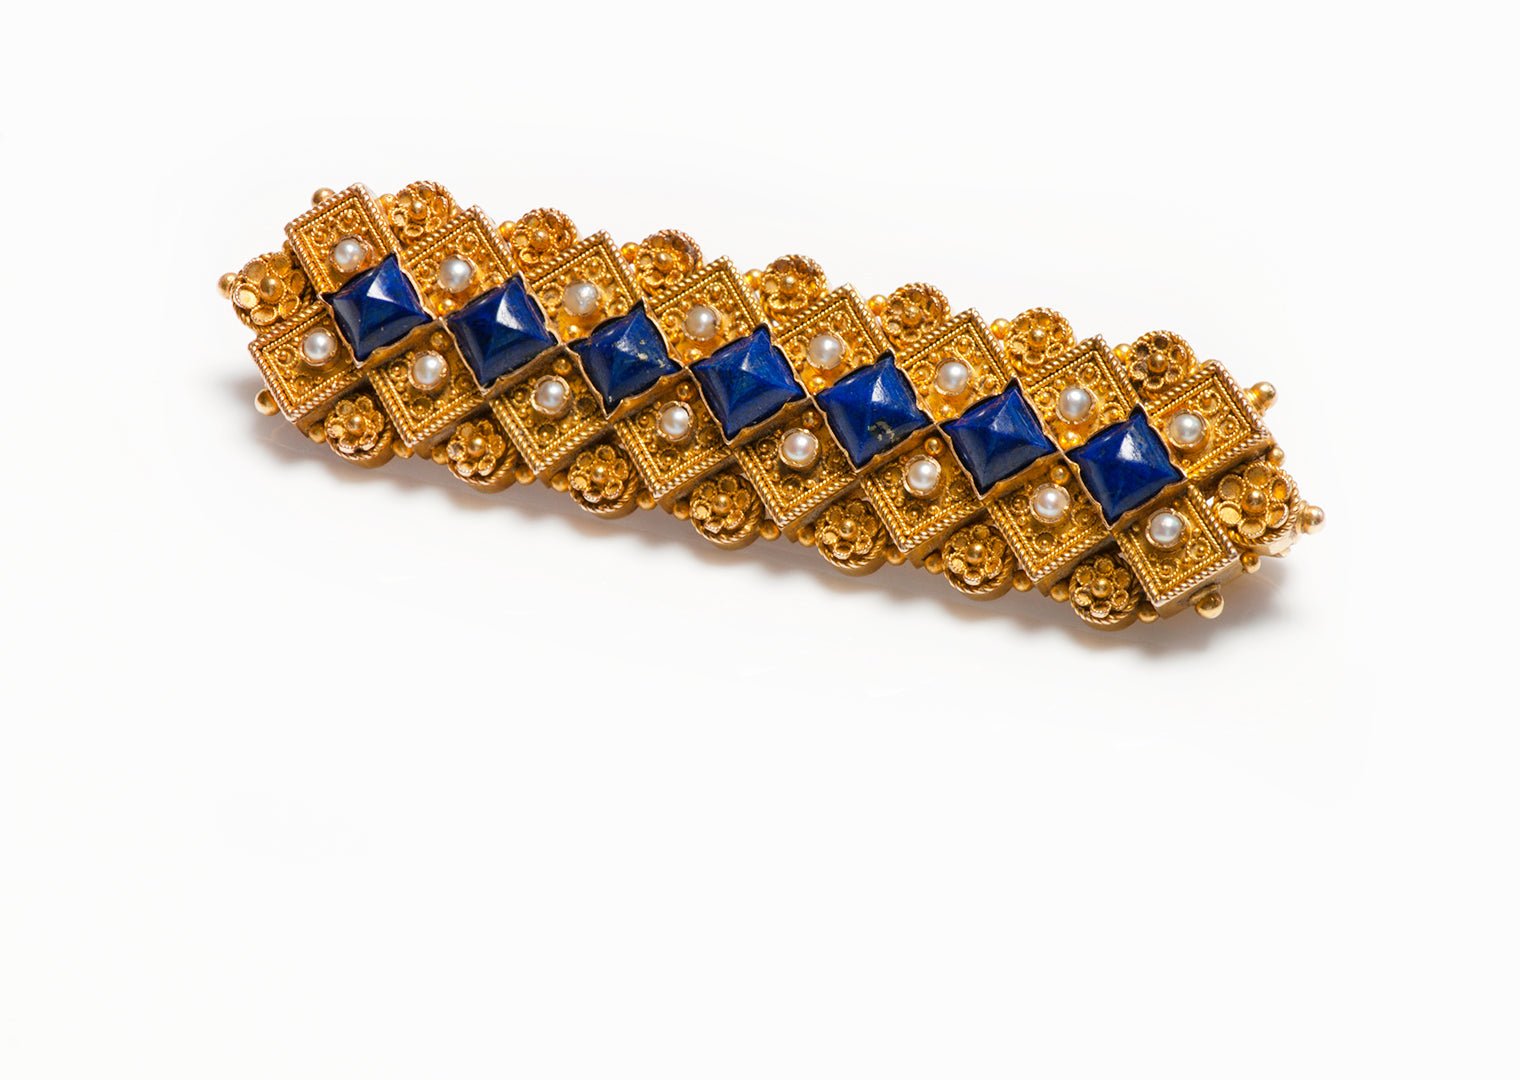 Antique Marchesini Gold Lapis Pearl Brooch - DSF Antique Jewelry